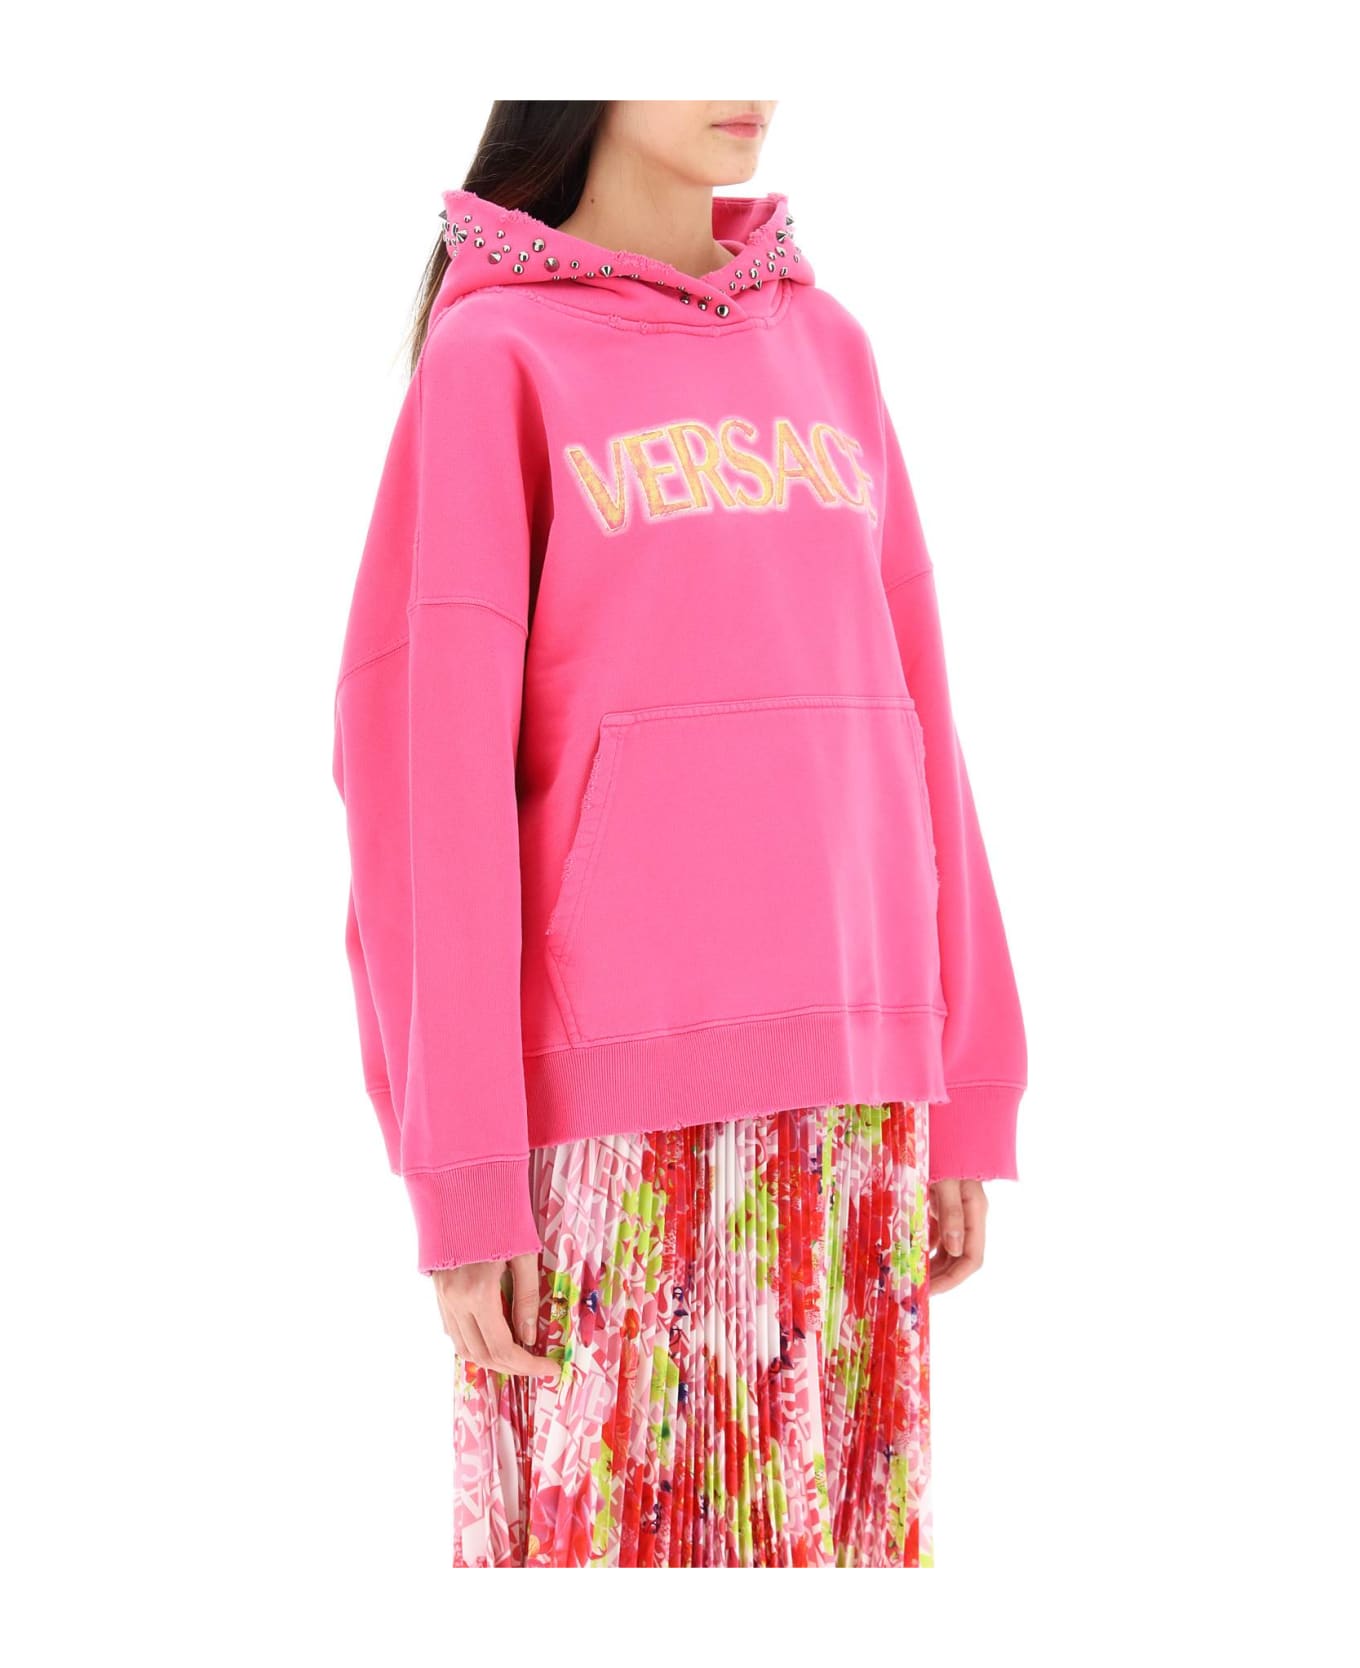 Versace Hoodie With Studs - Pink フリース